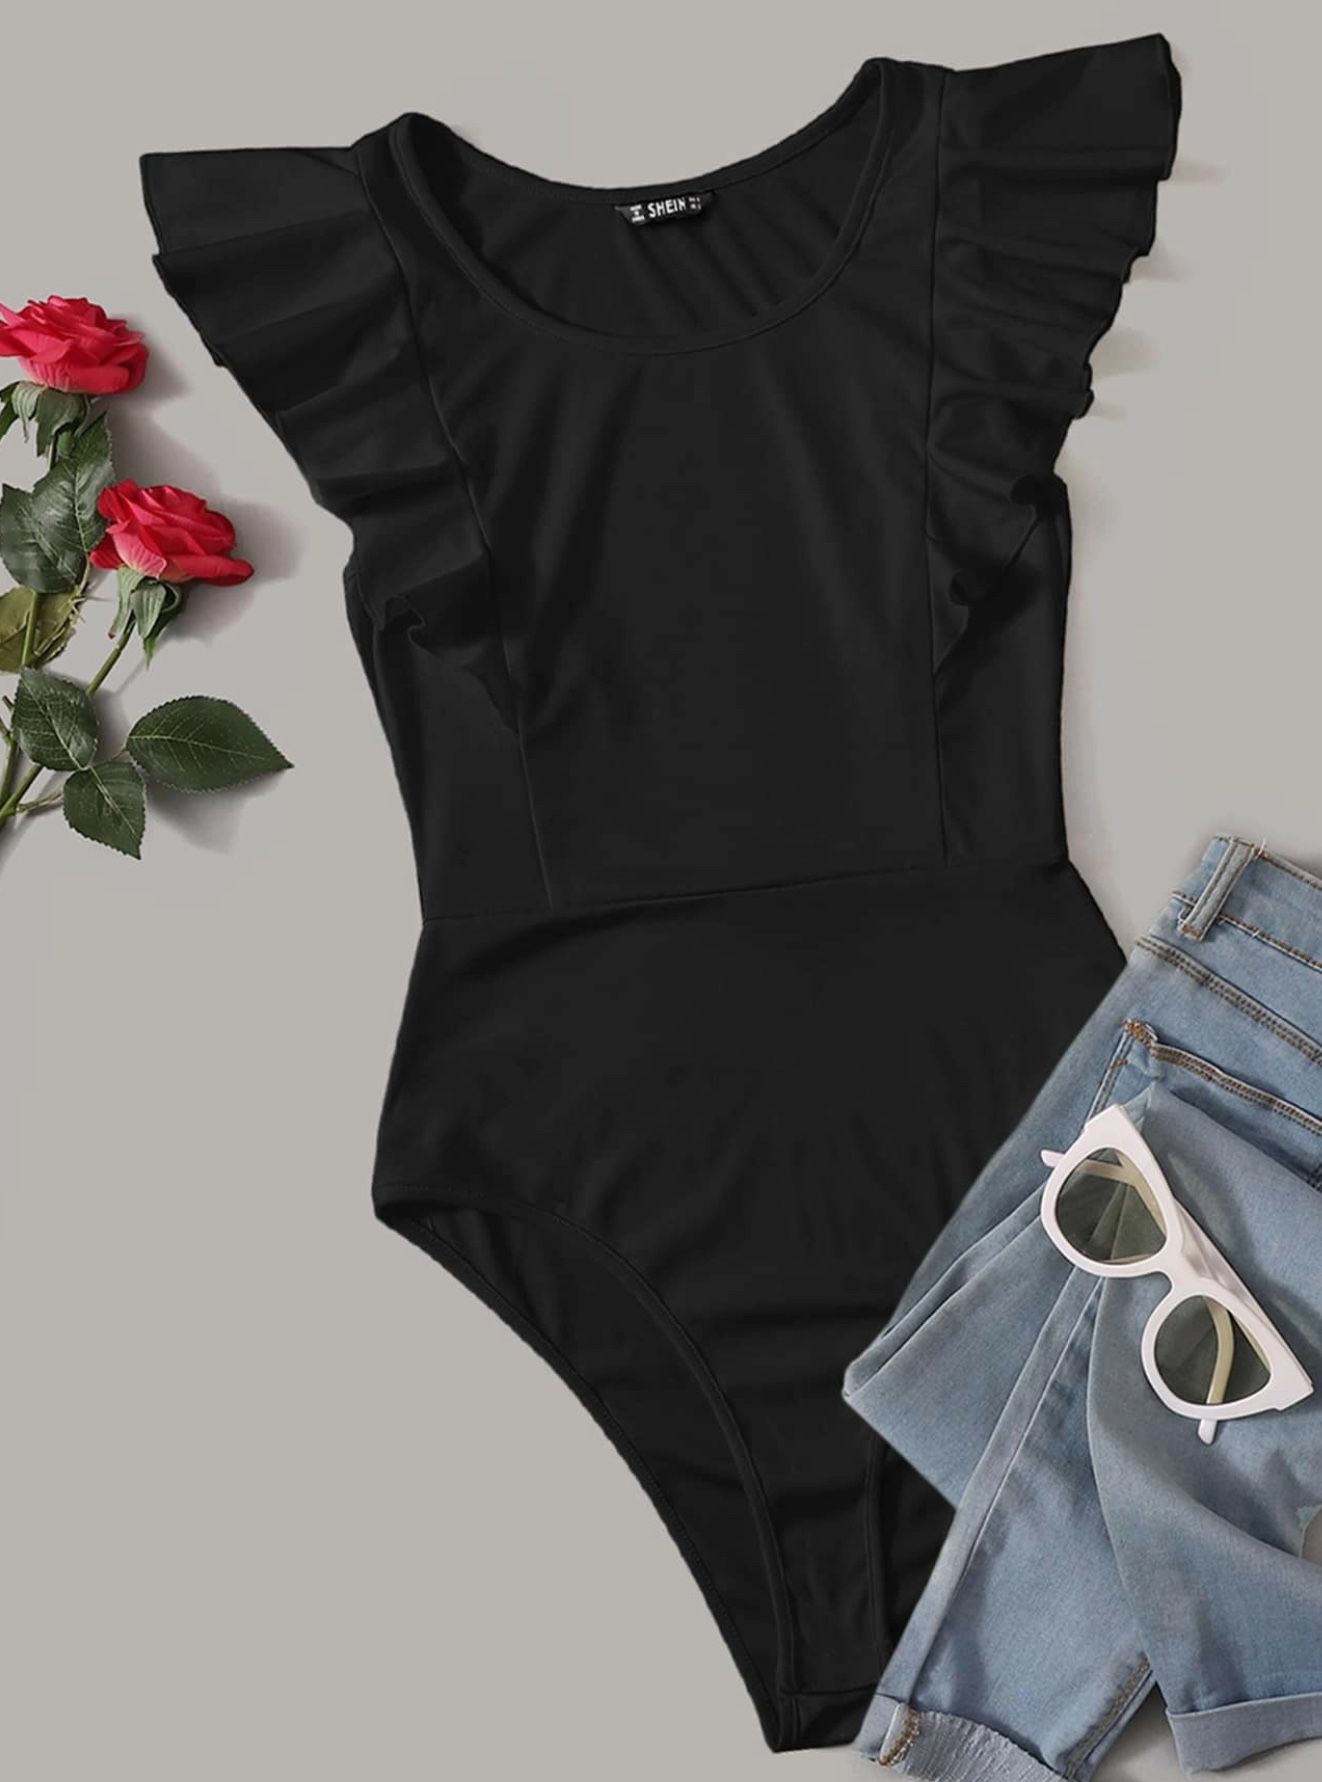 SHEIN Black Bodysuit With Ruffle Shoulders (Size S/4)